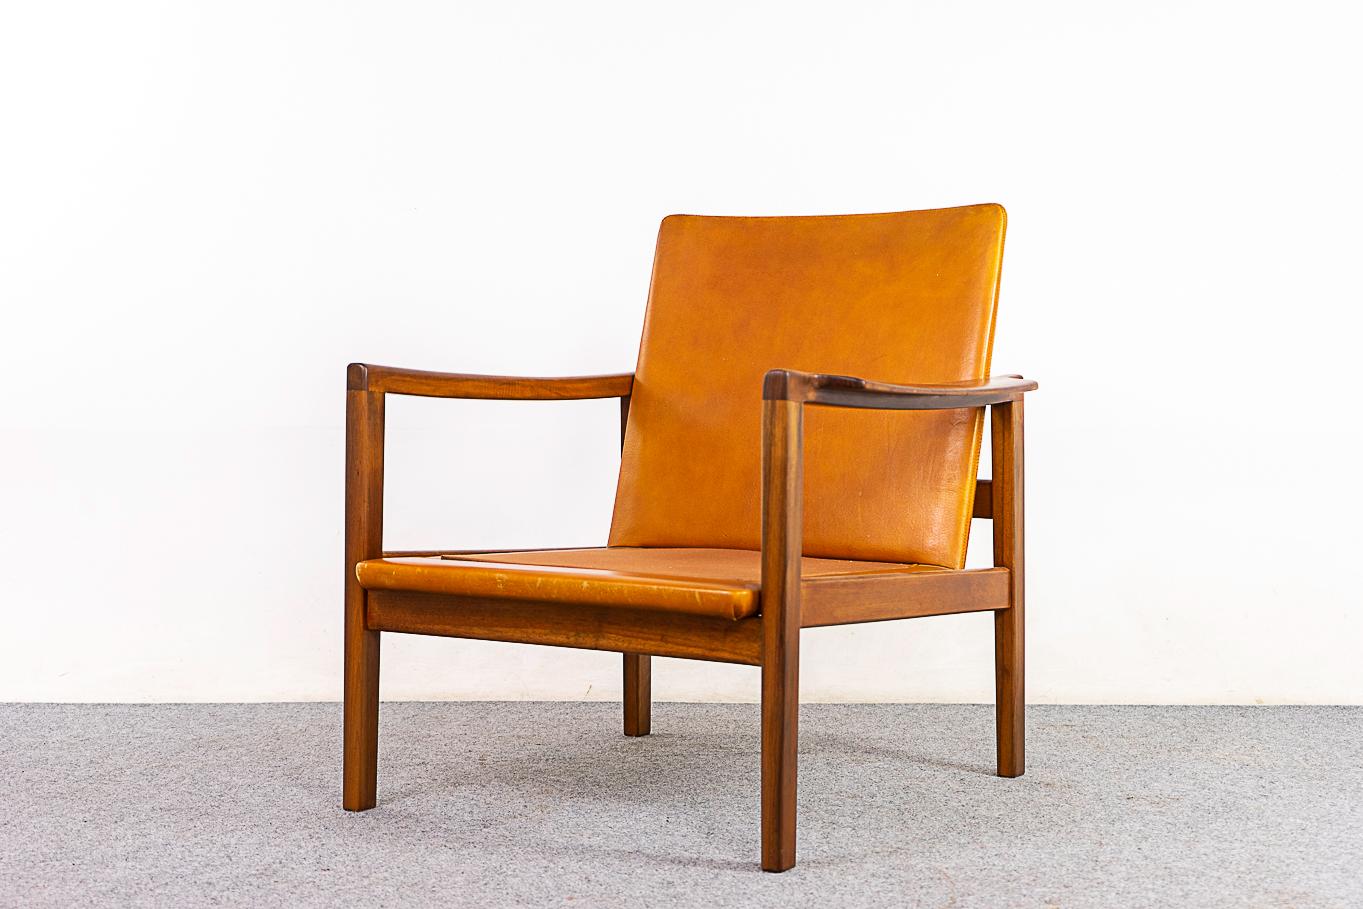 Walnut Danish lounge chair, circa 1960's. Beautifully sculpted frame with smooth joinery and a stunning silhouette. Solid wood frame and leather have been refinished. Seat & back cushions not included, customize upholstery on your end to suit the